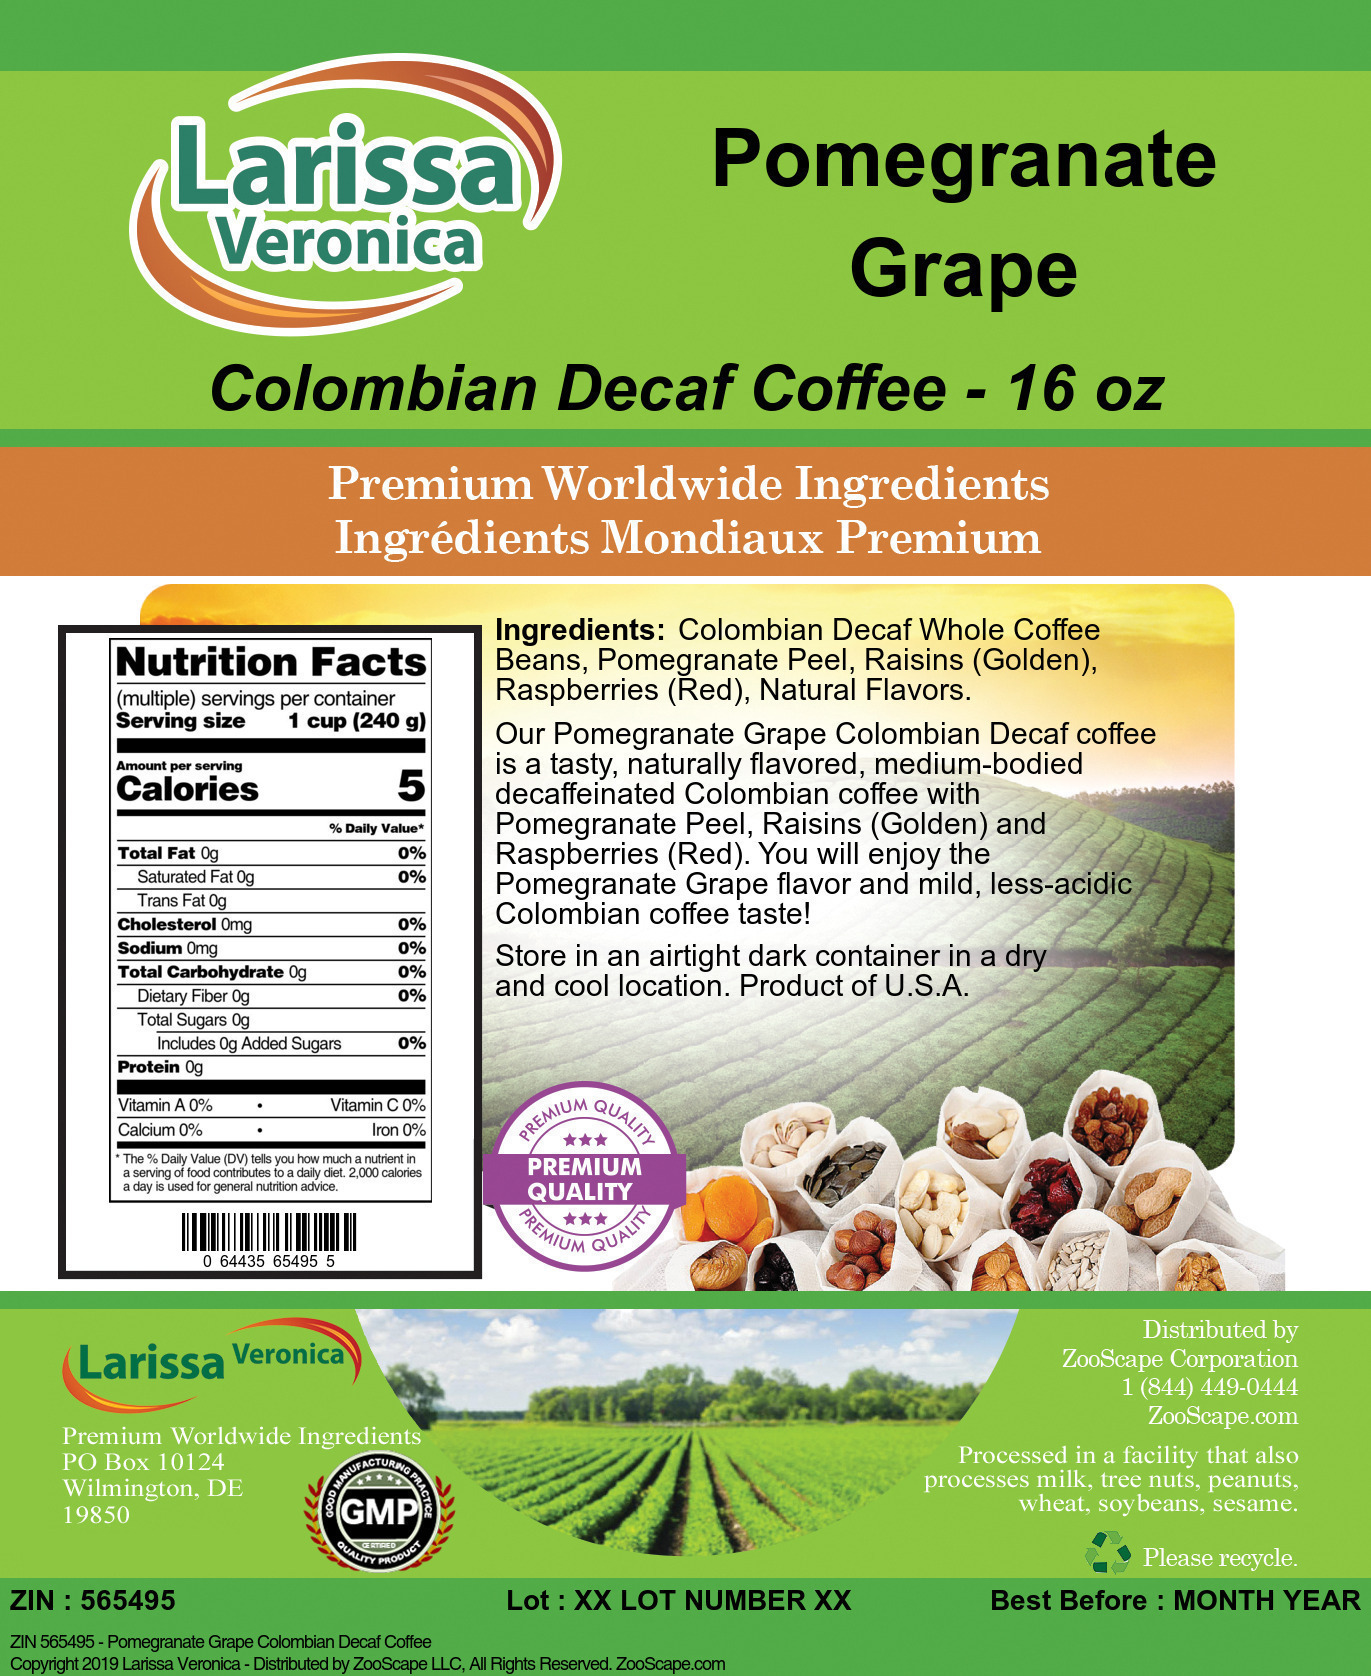 Pomegranate Grape Colombian Decaf Coffee - Label